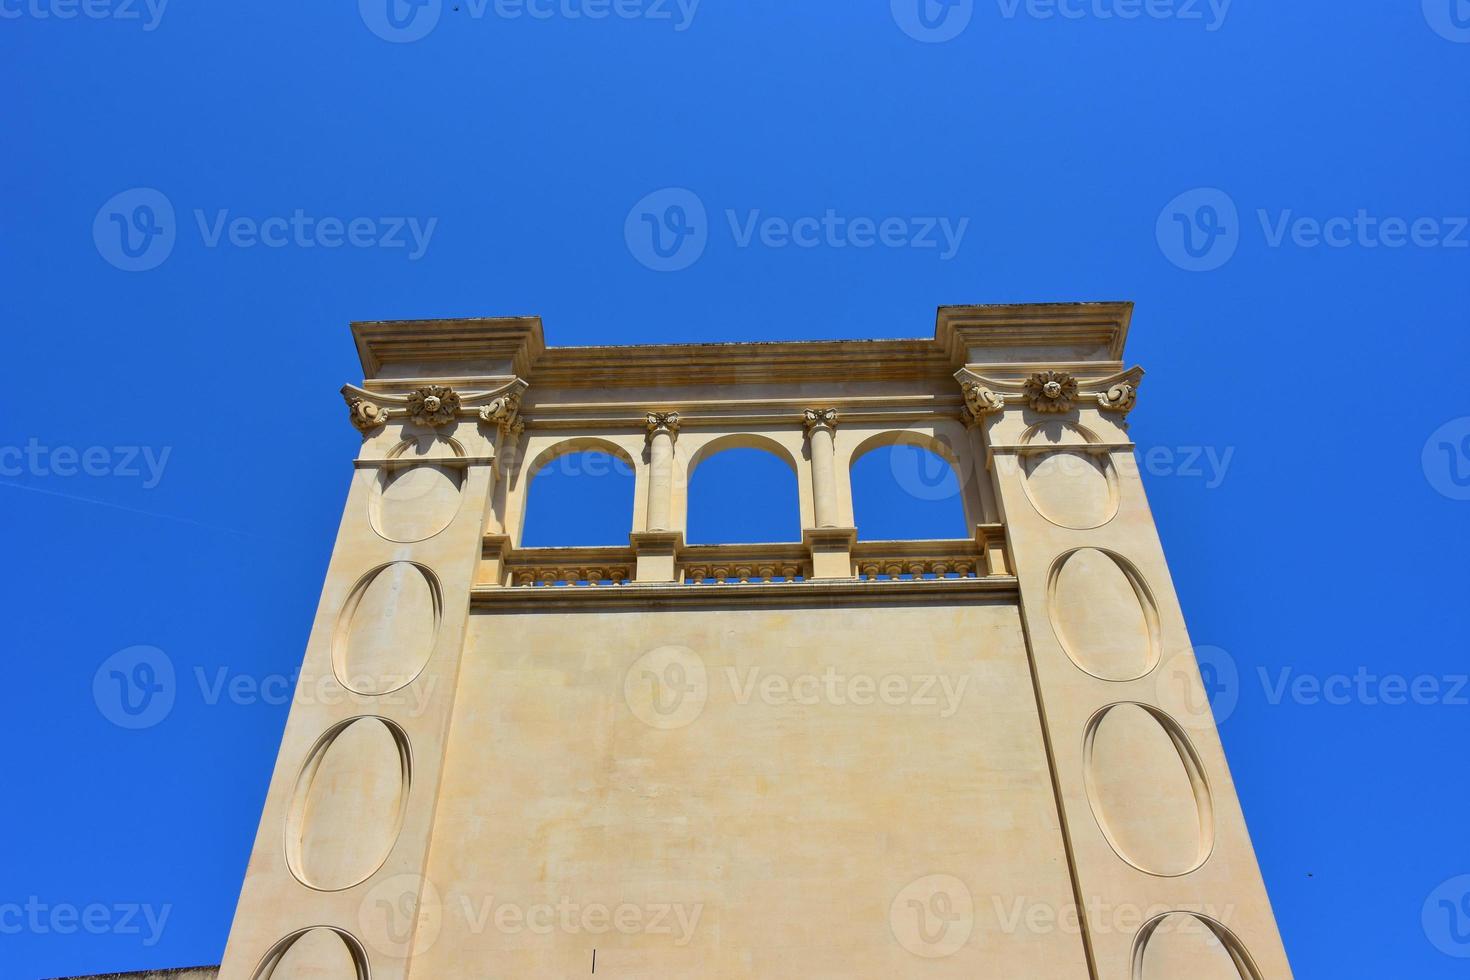 Italy, Lecce, city with Baroque architecture and churches and archaeological remains. photo